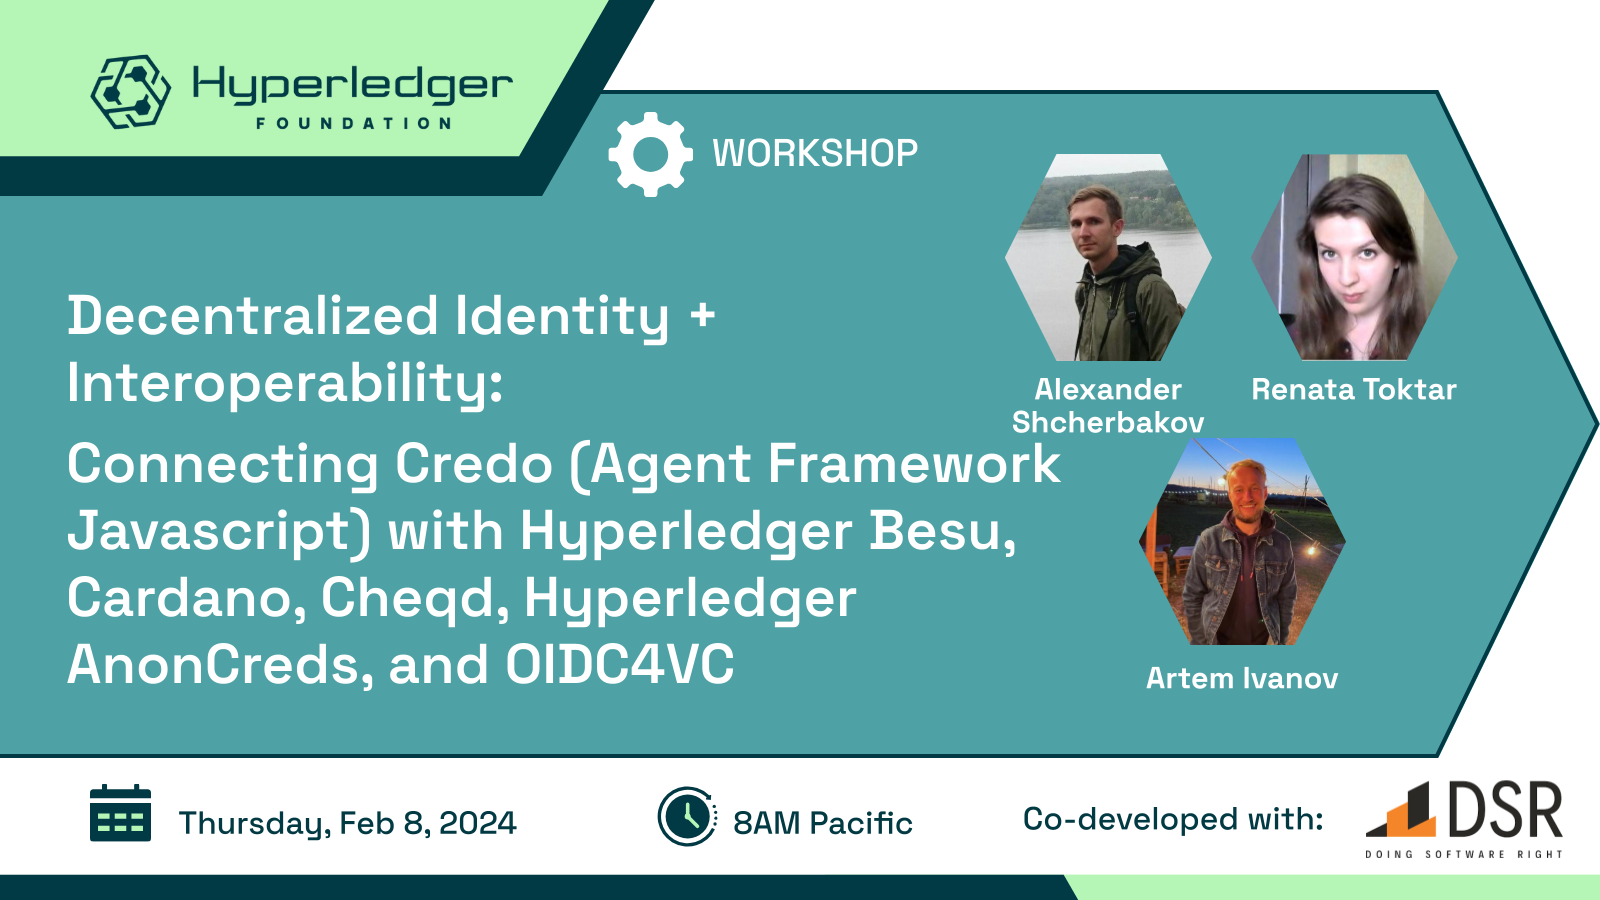 Decentralized Identity + Interoperability: Connecting Credo (Agent Framework Javascript) with Hyperledger Besu, Cardano, Cheqd, Hyperledger AnonCreds, and OIDC4VC